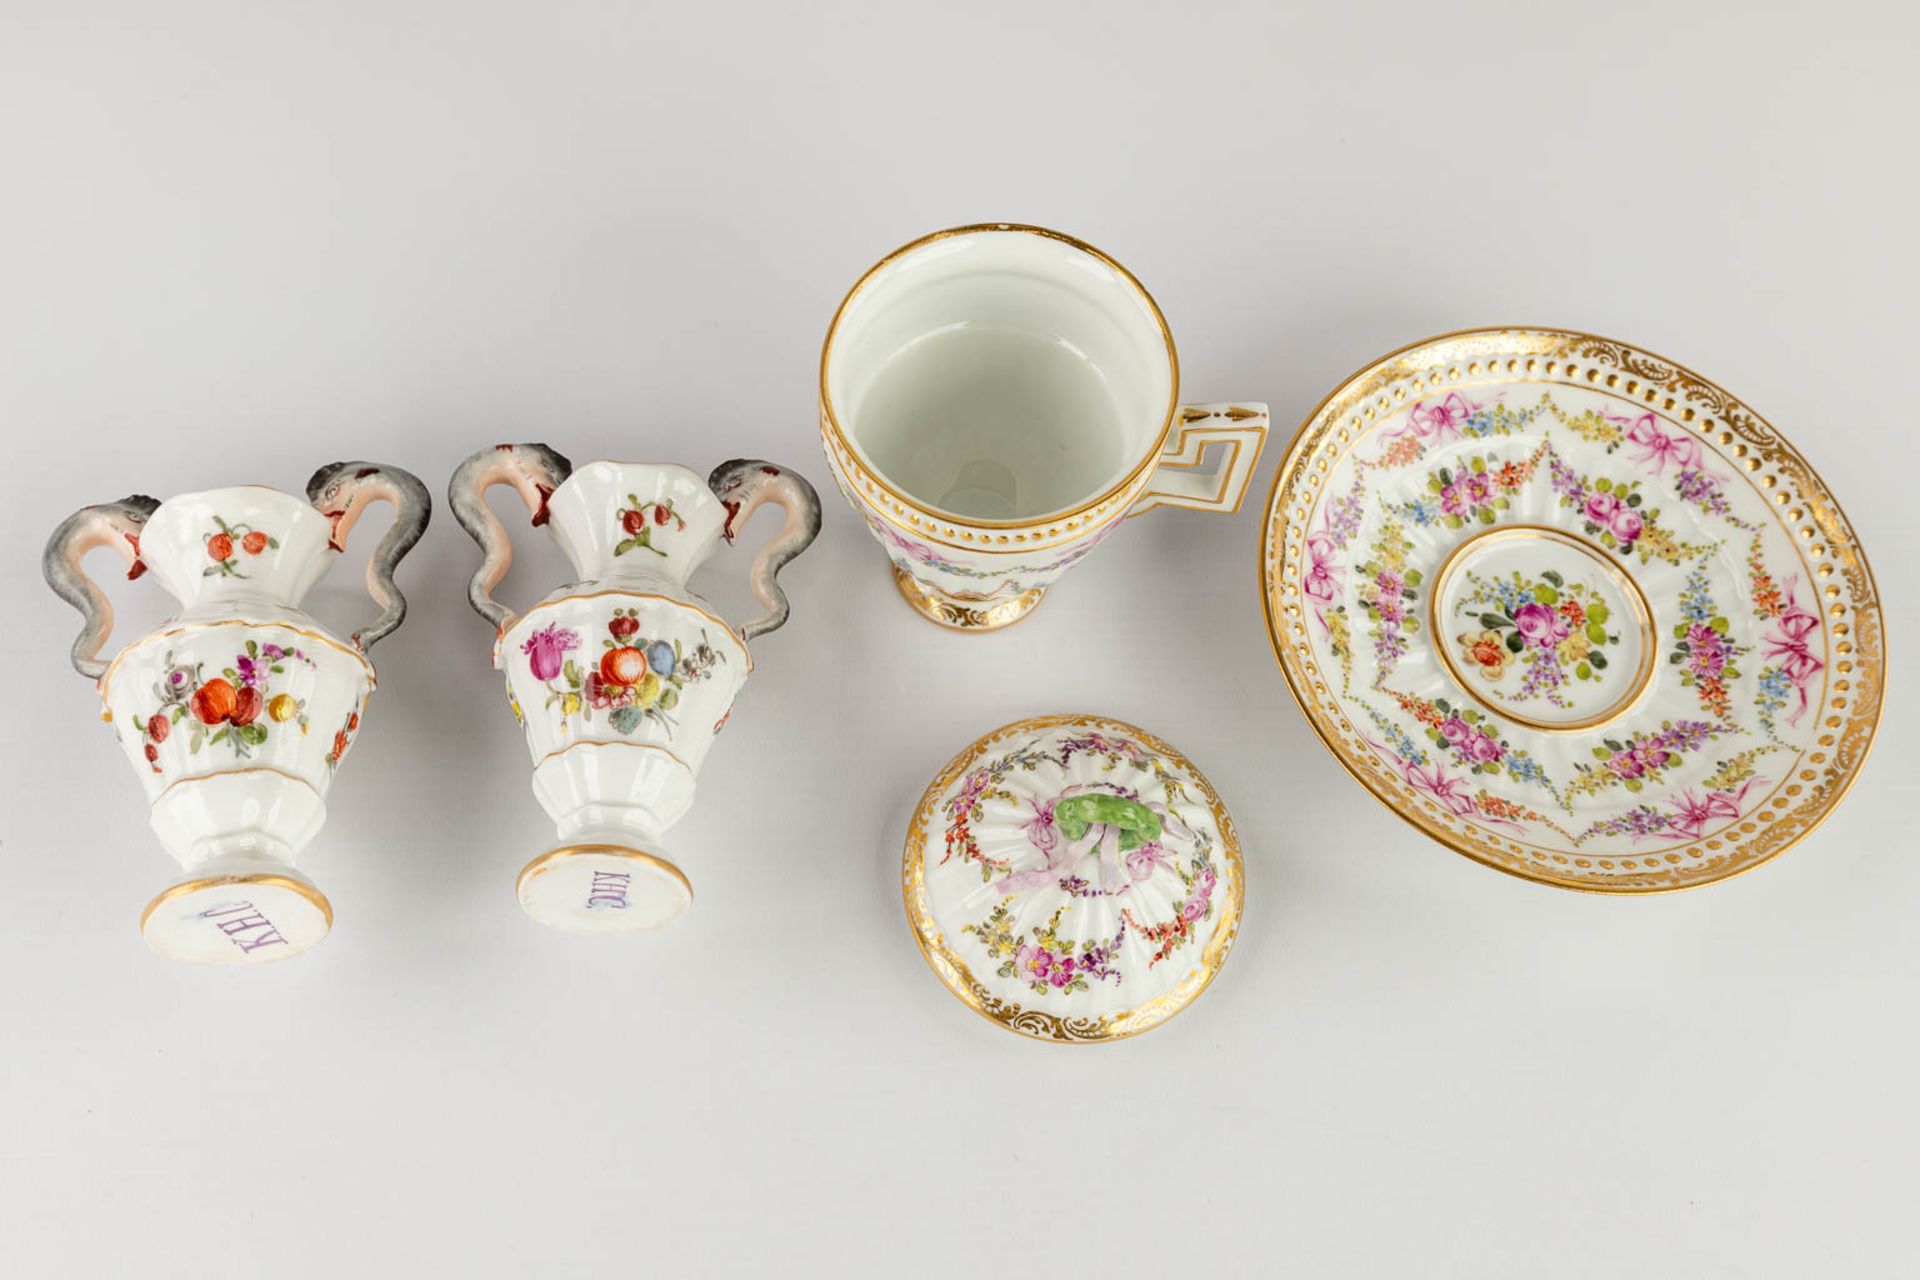 A large collection of porcelain items and table accessories of multiple marks. 19th and 20th C. (H:2 - Image 21 of 36